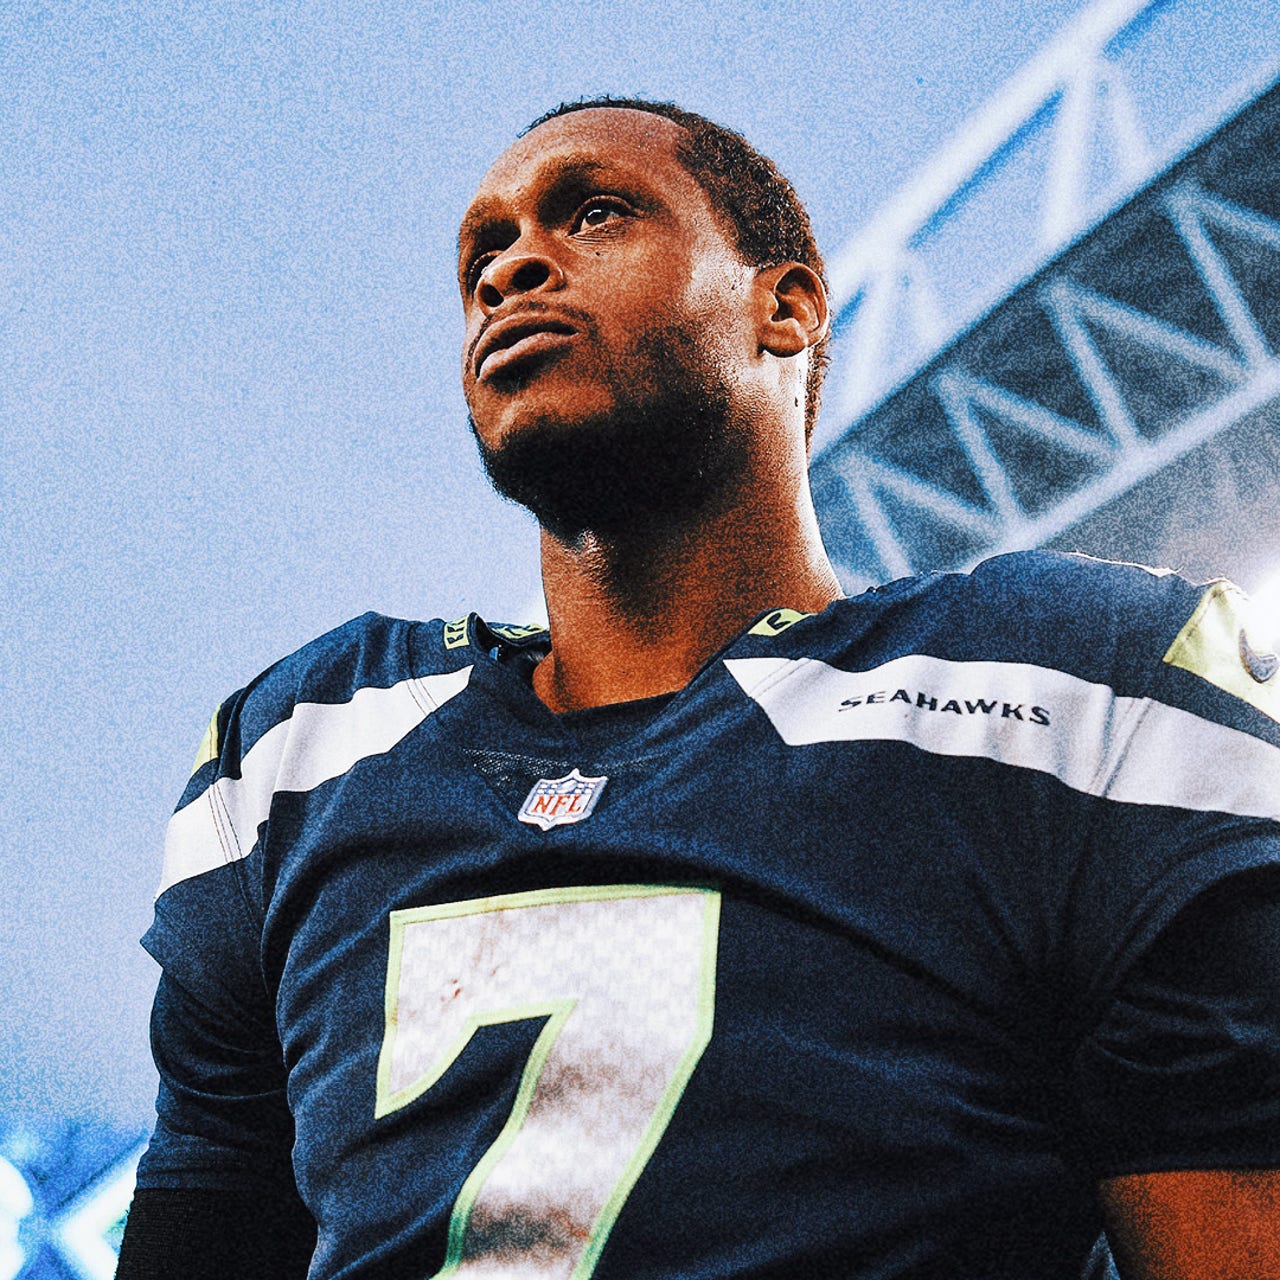 Seattle Seahawks want Geno Smith back under center in 2023, per reports